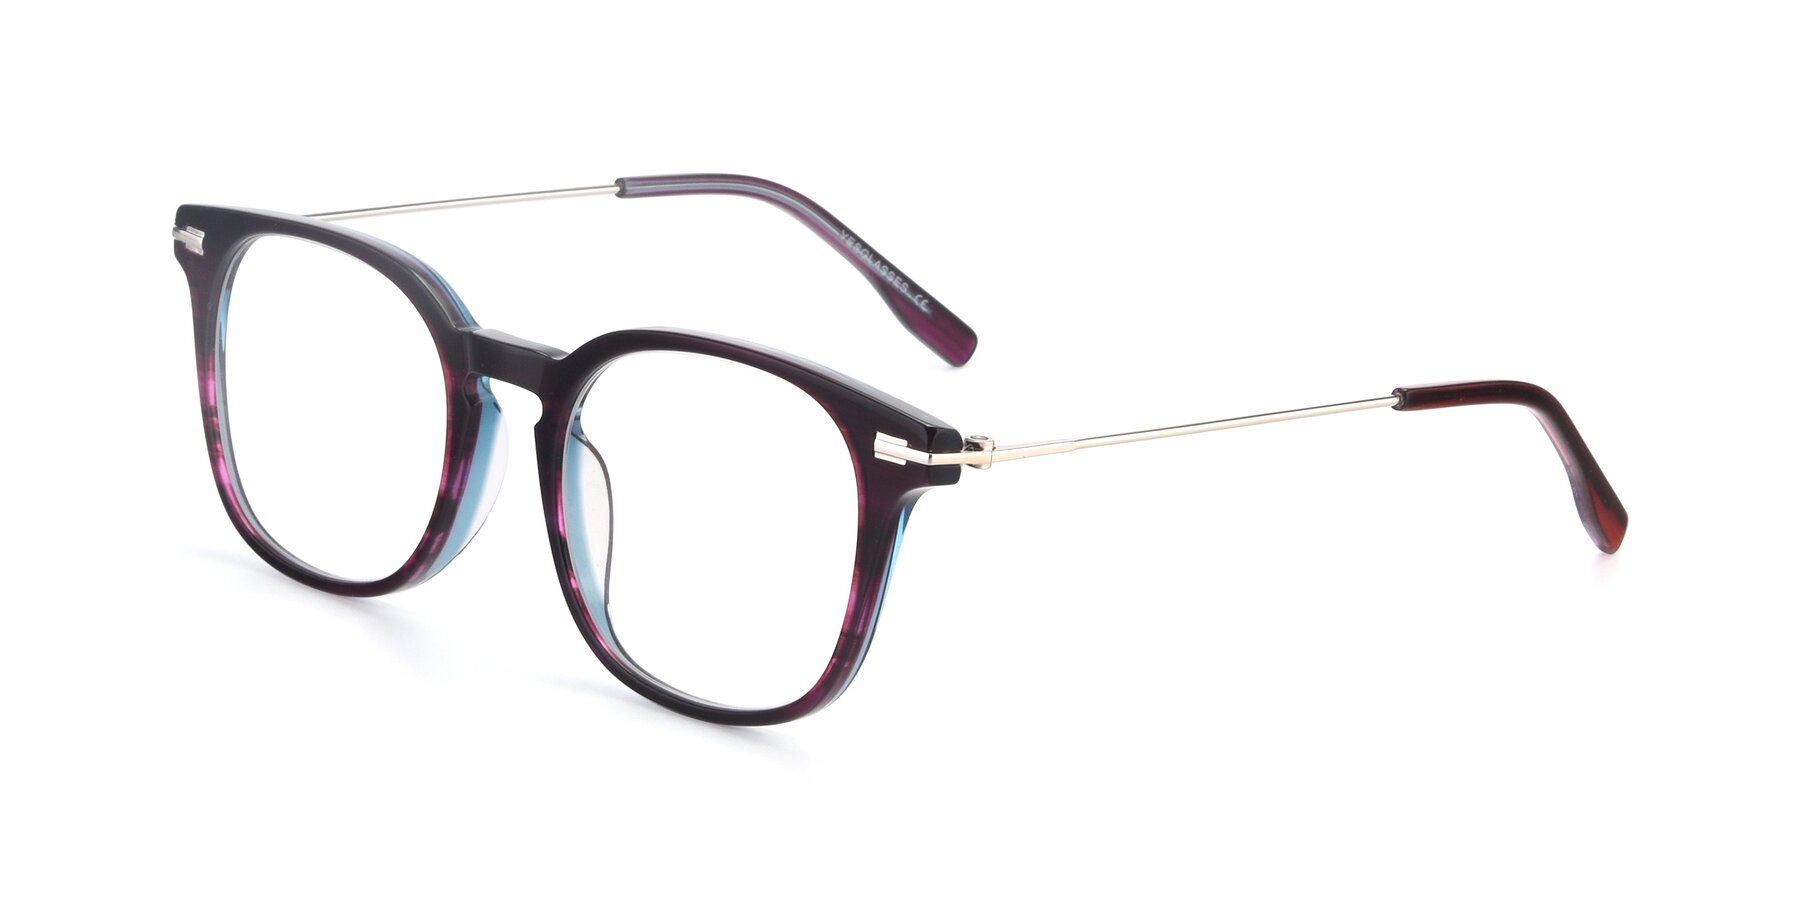 Angle of 17711 in Dark Purple with Clear Blue Light Blocking Lenses